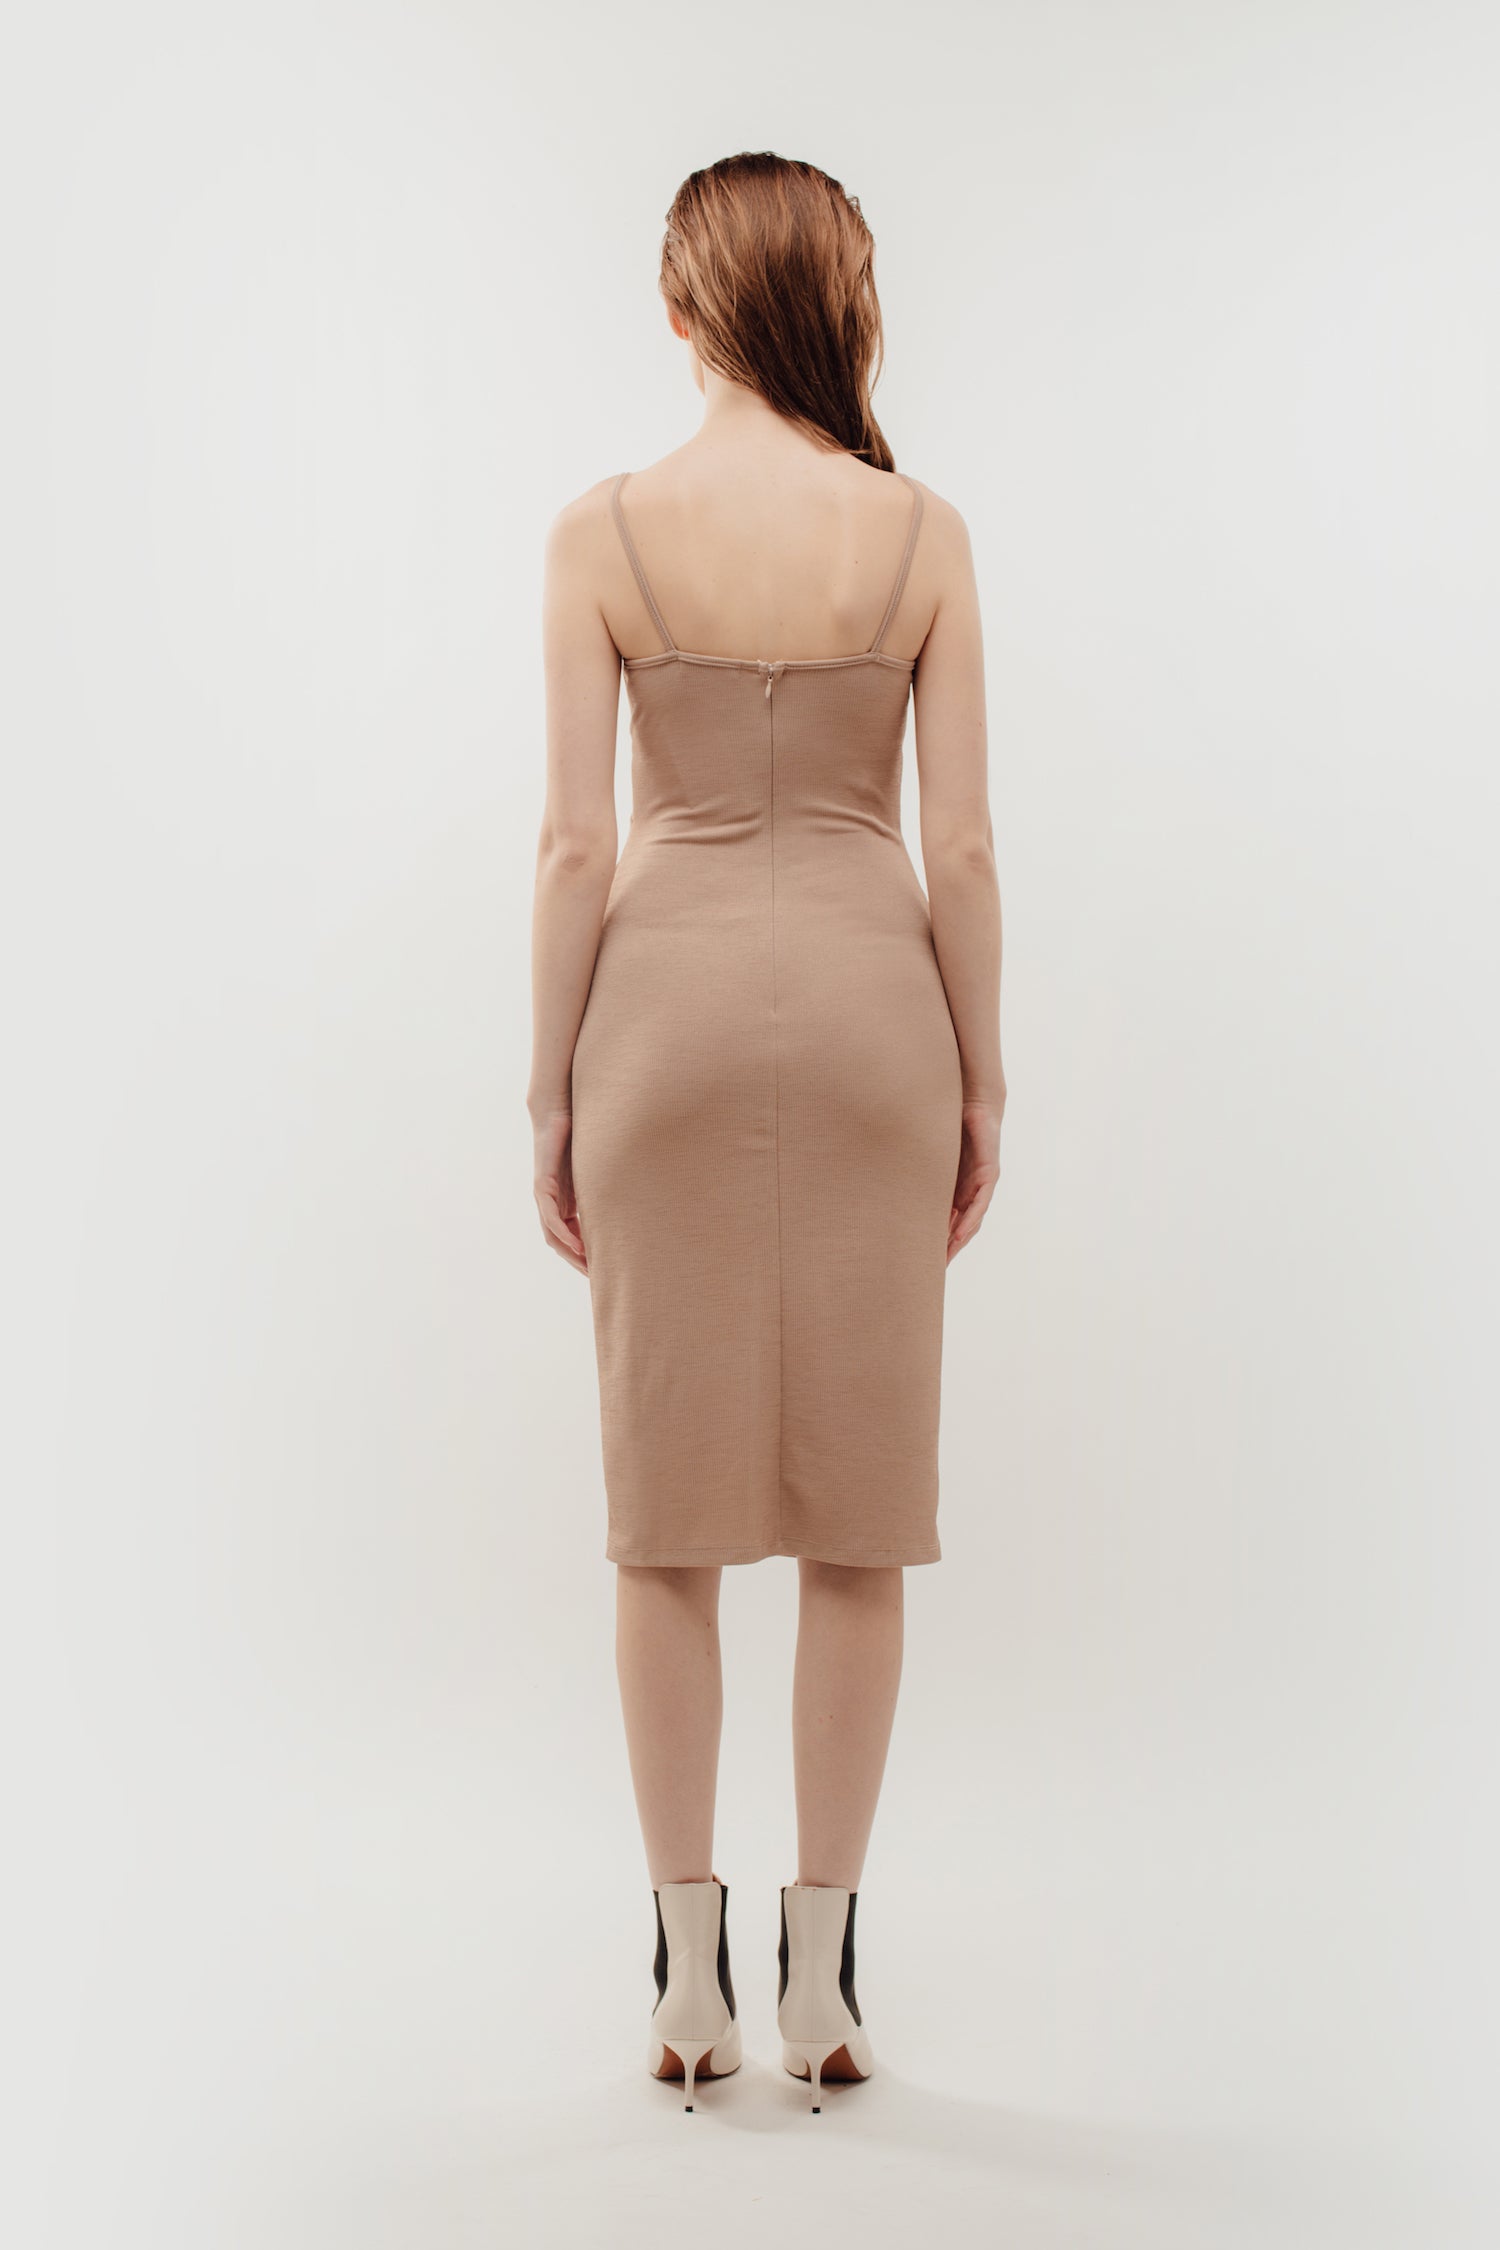 Knotted Dress in Nude Beige